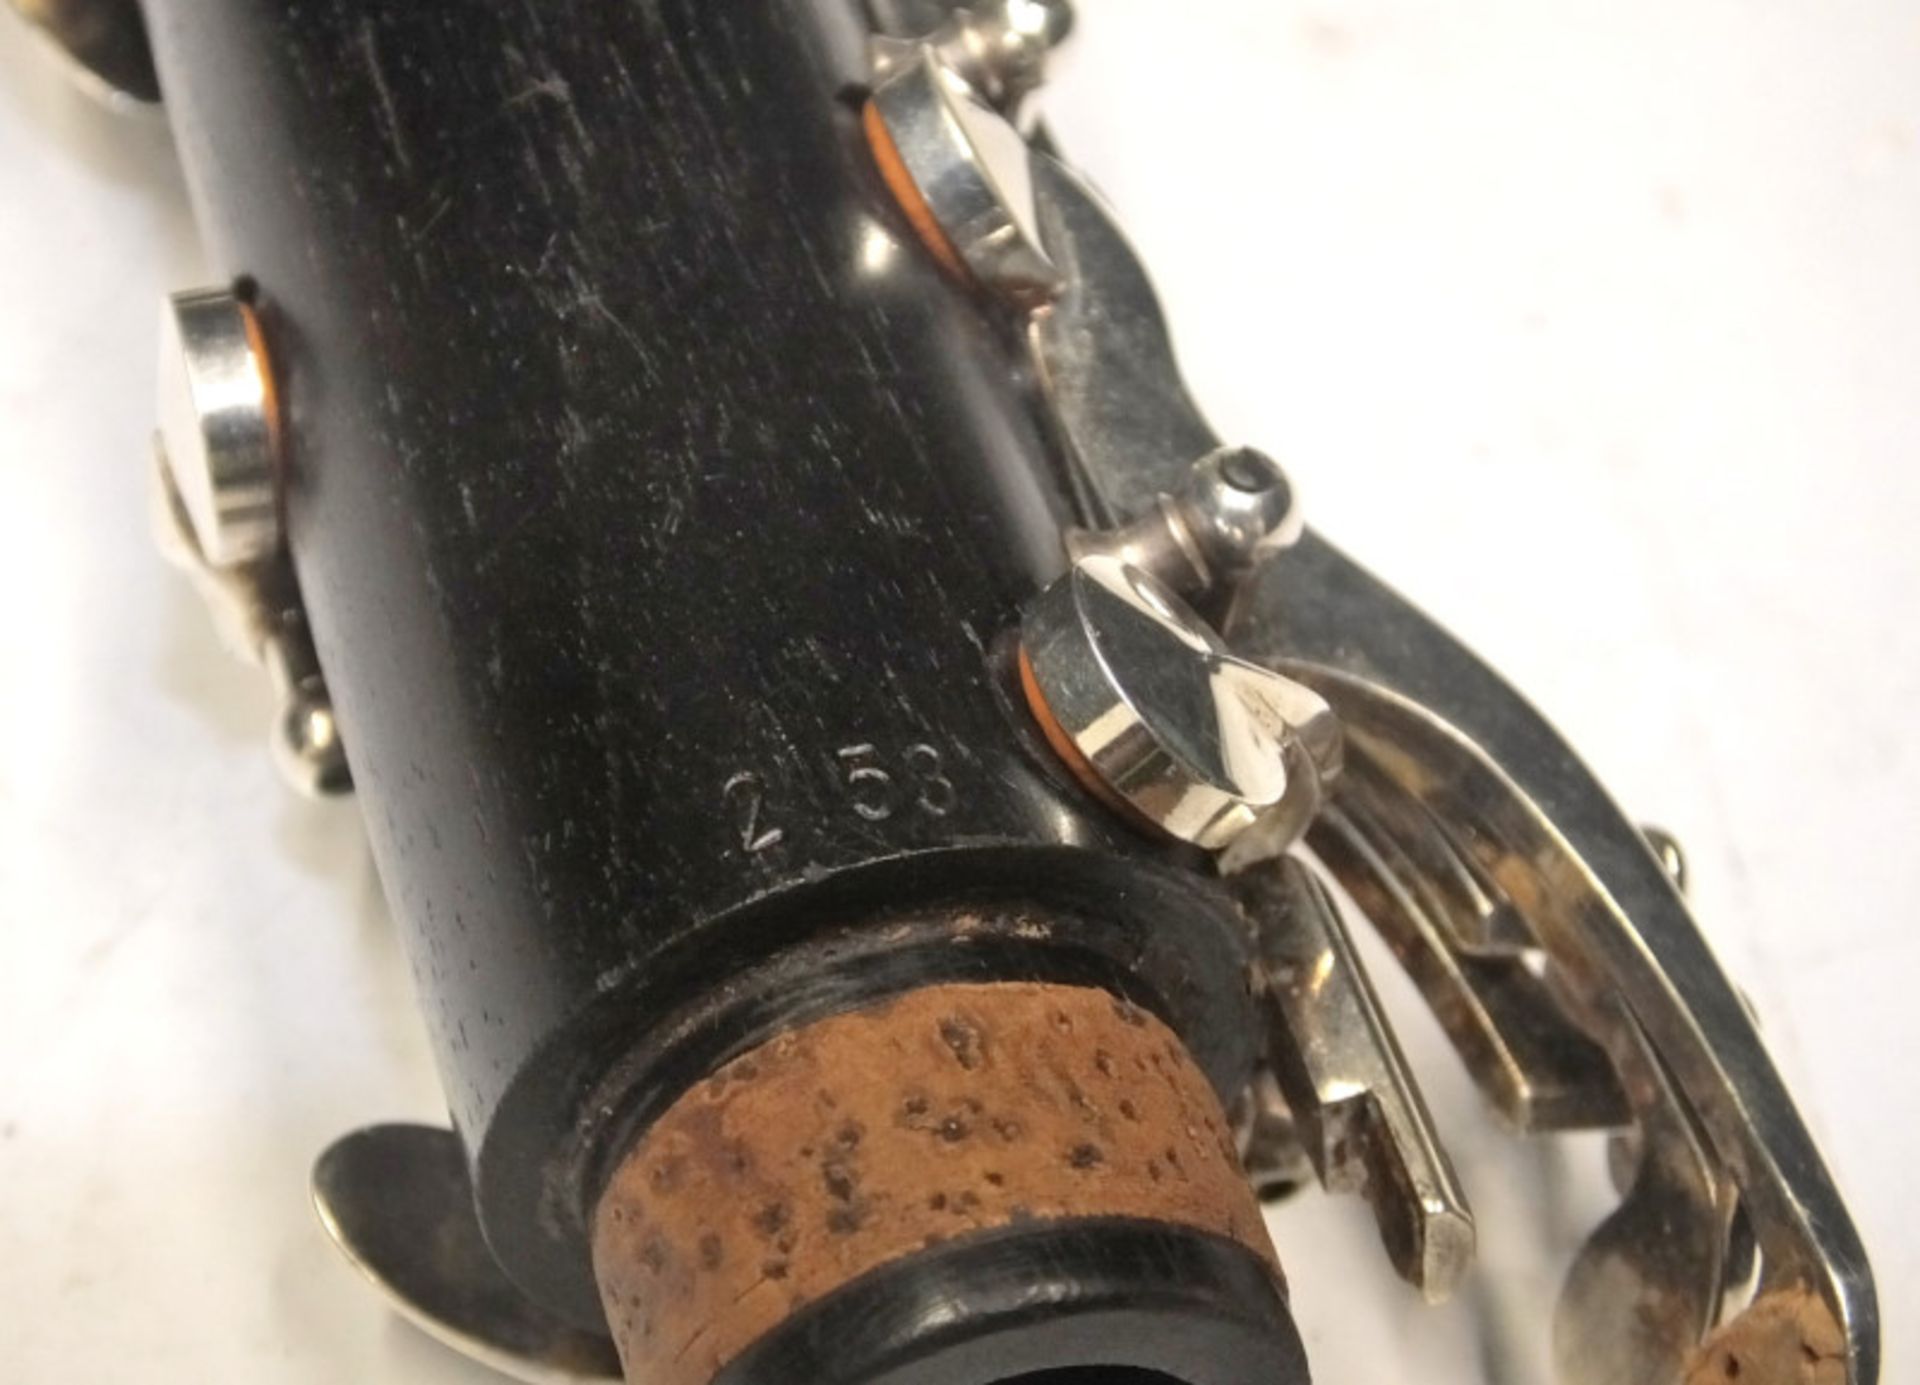 Howarth S2 Clarinet in case - Serial Number - 2153. - Image 7 of 22